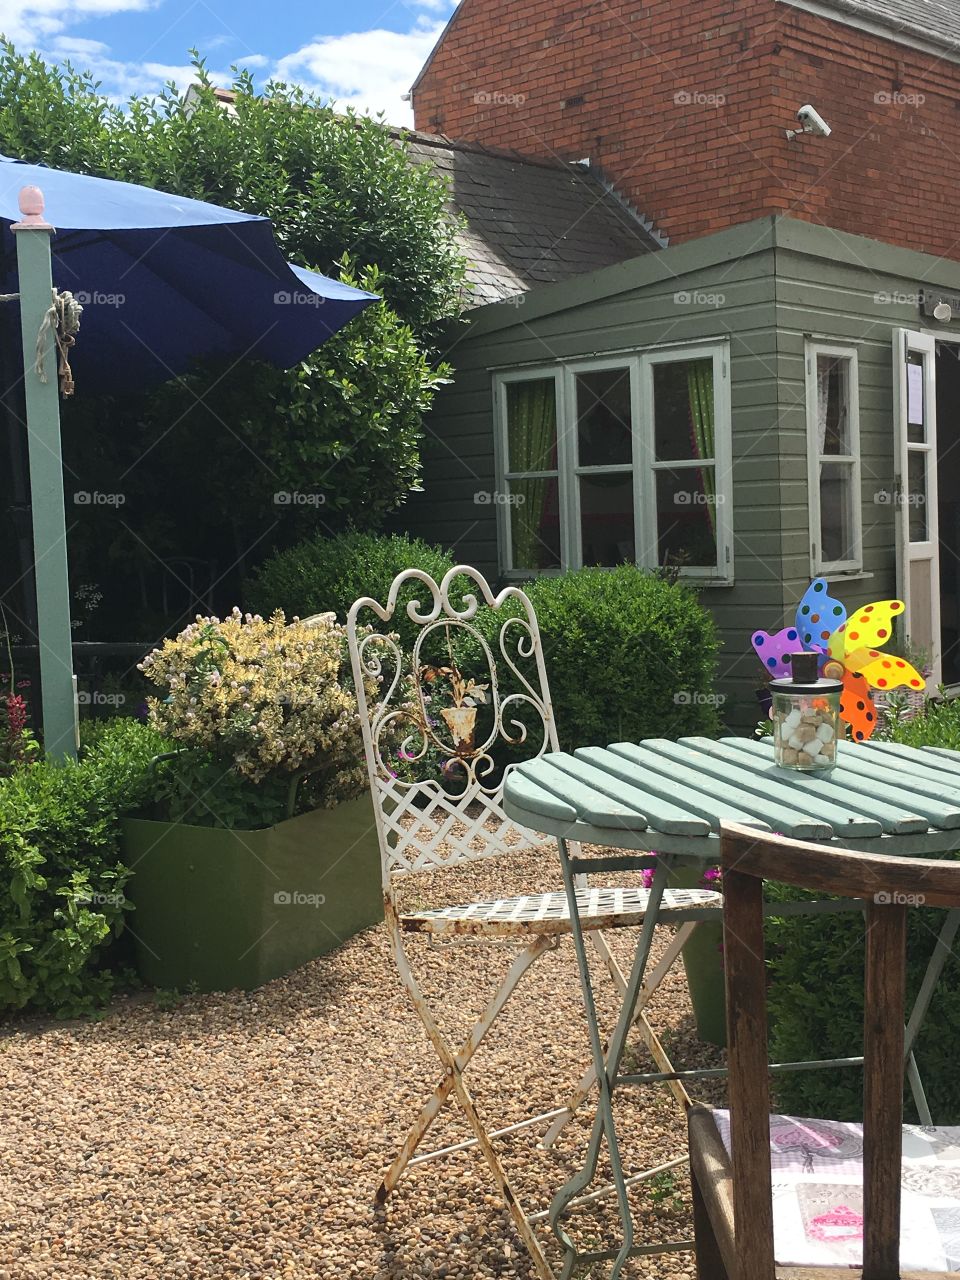 Table and chairs outside in the garden at a tearoom surrounded by plants 